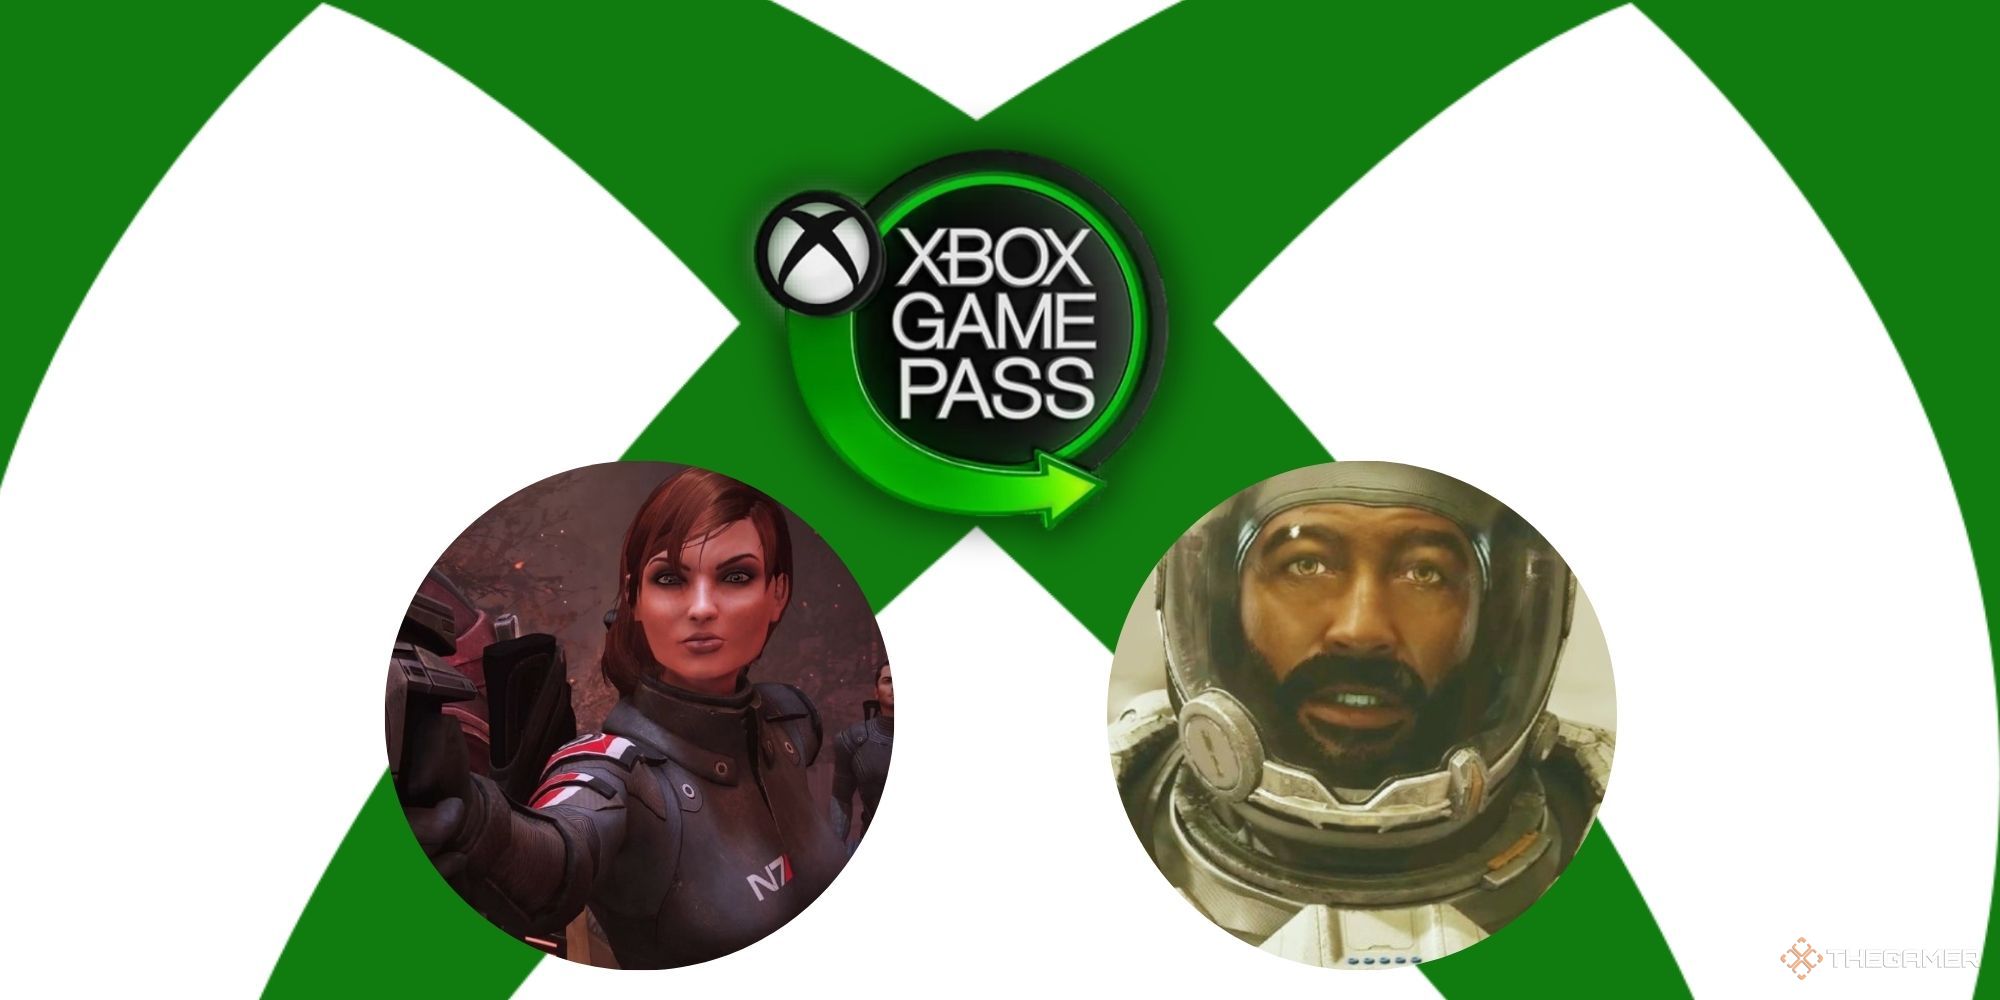 Choice-Based Games On Xbox Game Pass Featured Image Xbox Game Pass Logo With Mass Effect and Starfield images underneath